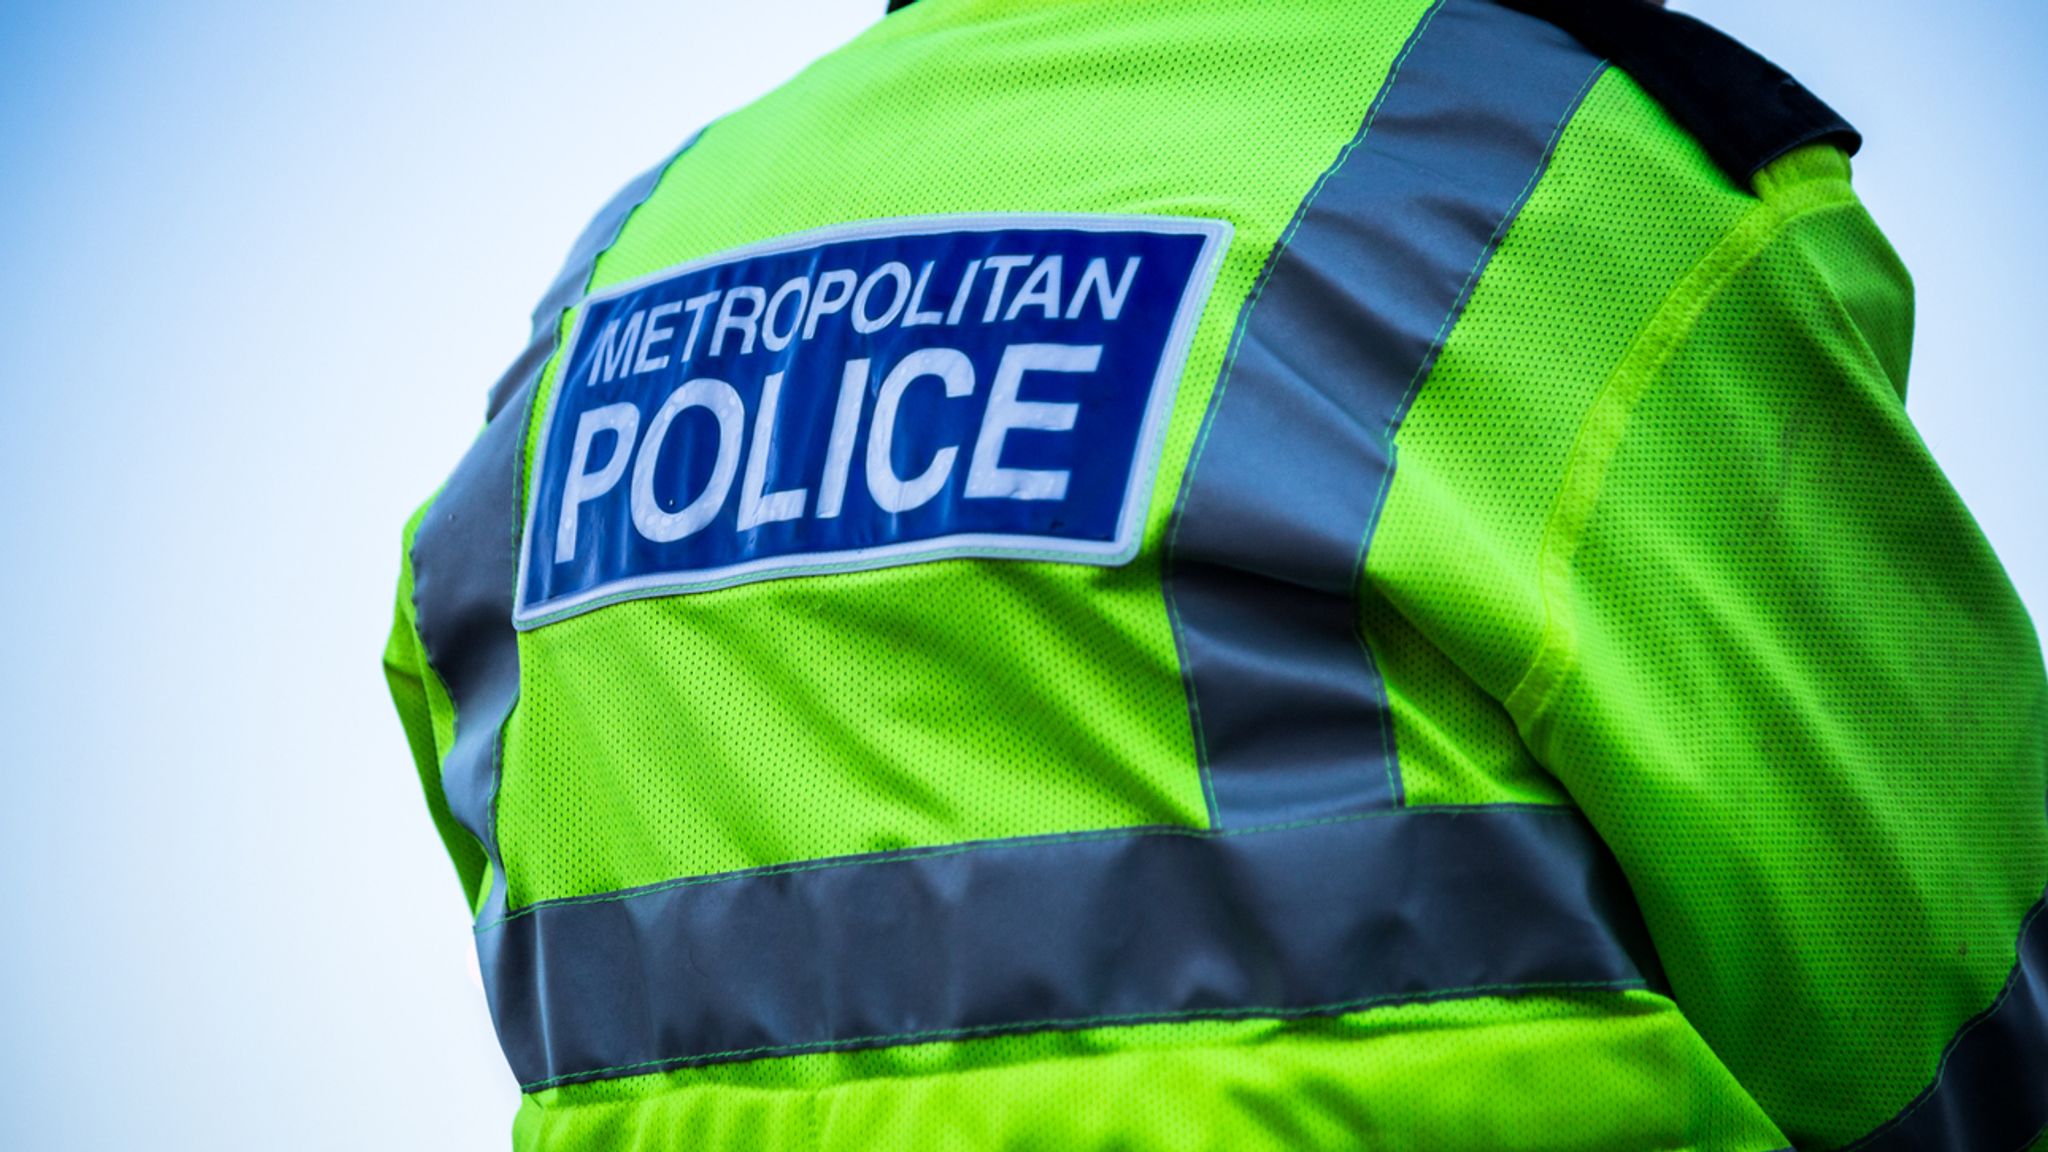 11 Met Police Officers Investigated Over Allegations Of Violence Racism And Steroid Use Uk 2164